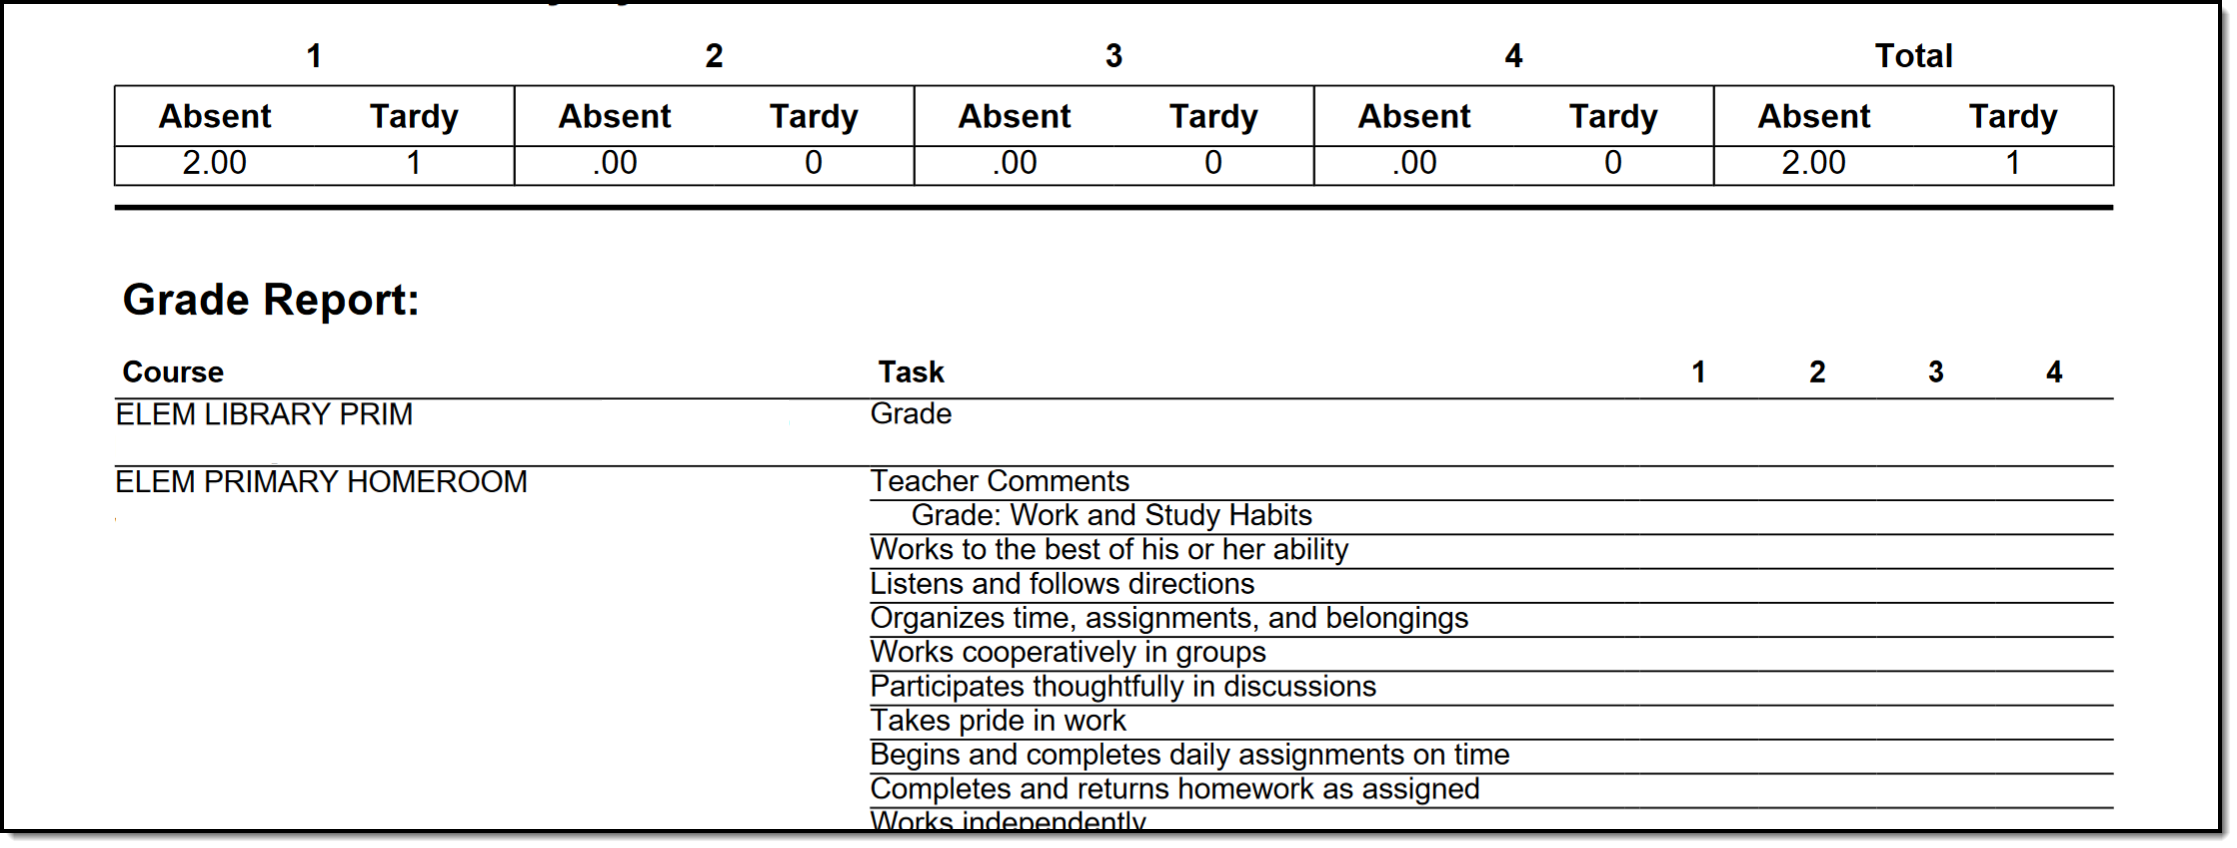 Screenshot of  grading tasks included that do not have scores, in addition to standards that do have scores.